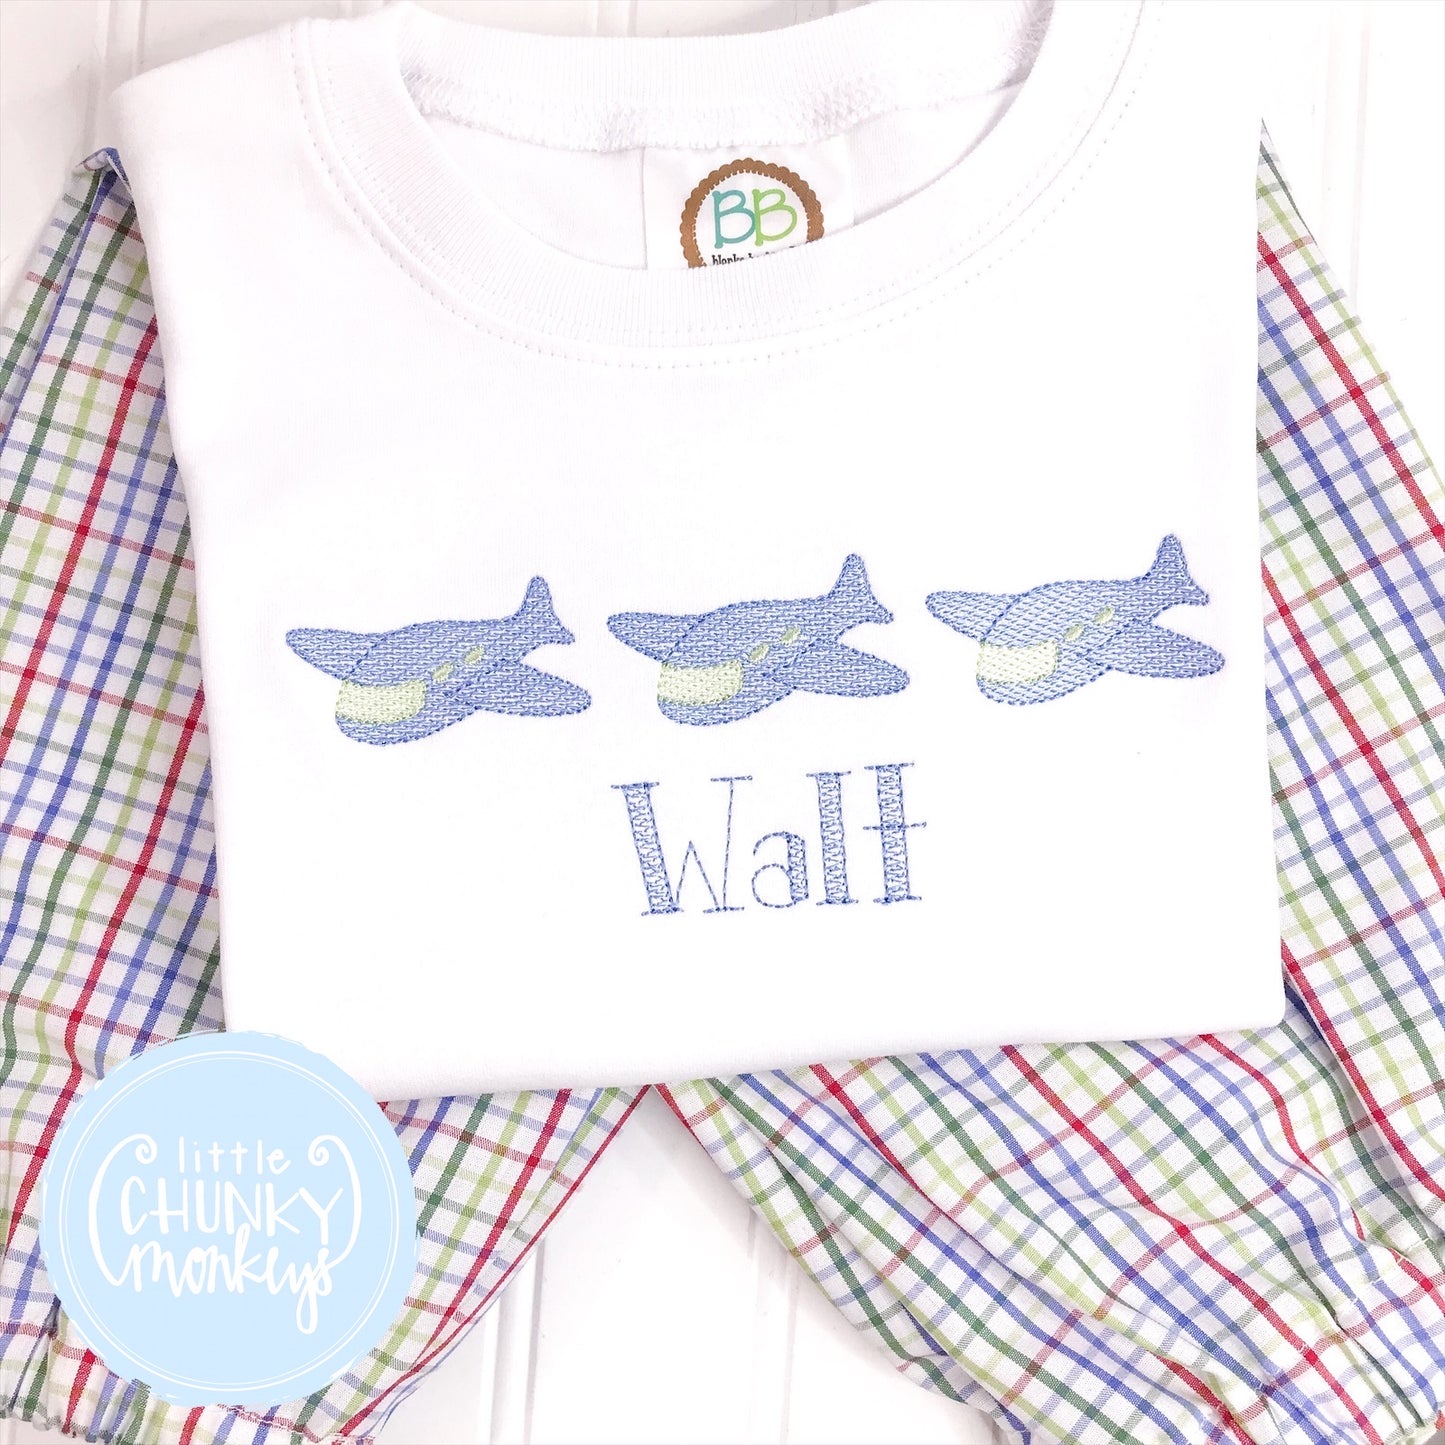 Boy Shirt - Embroidered Airplanes on White shirt